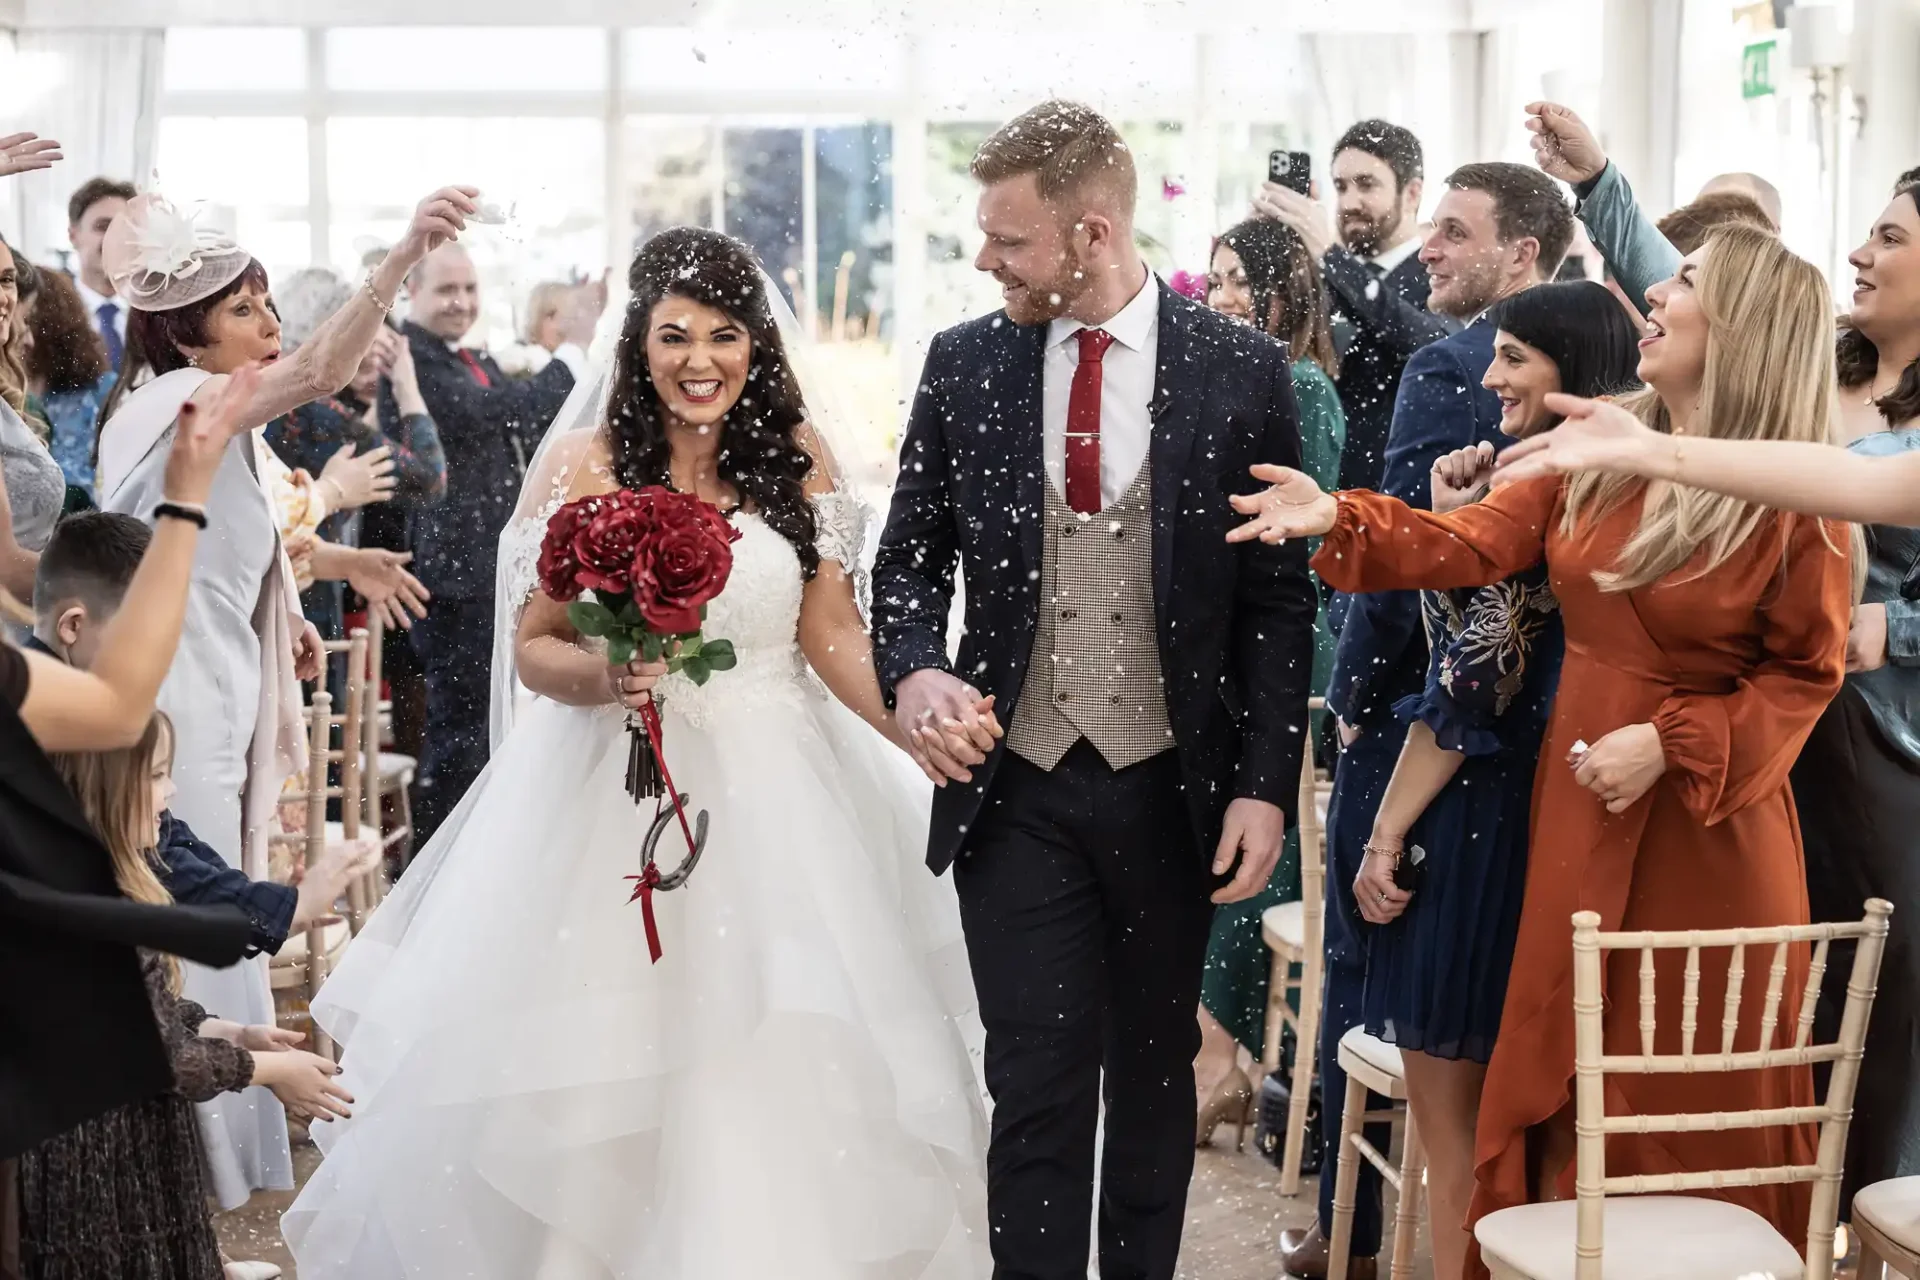 A joyful bride and groom walking hand-in-hand as guests throw confetti during their wedding ceremony.